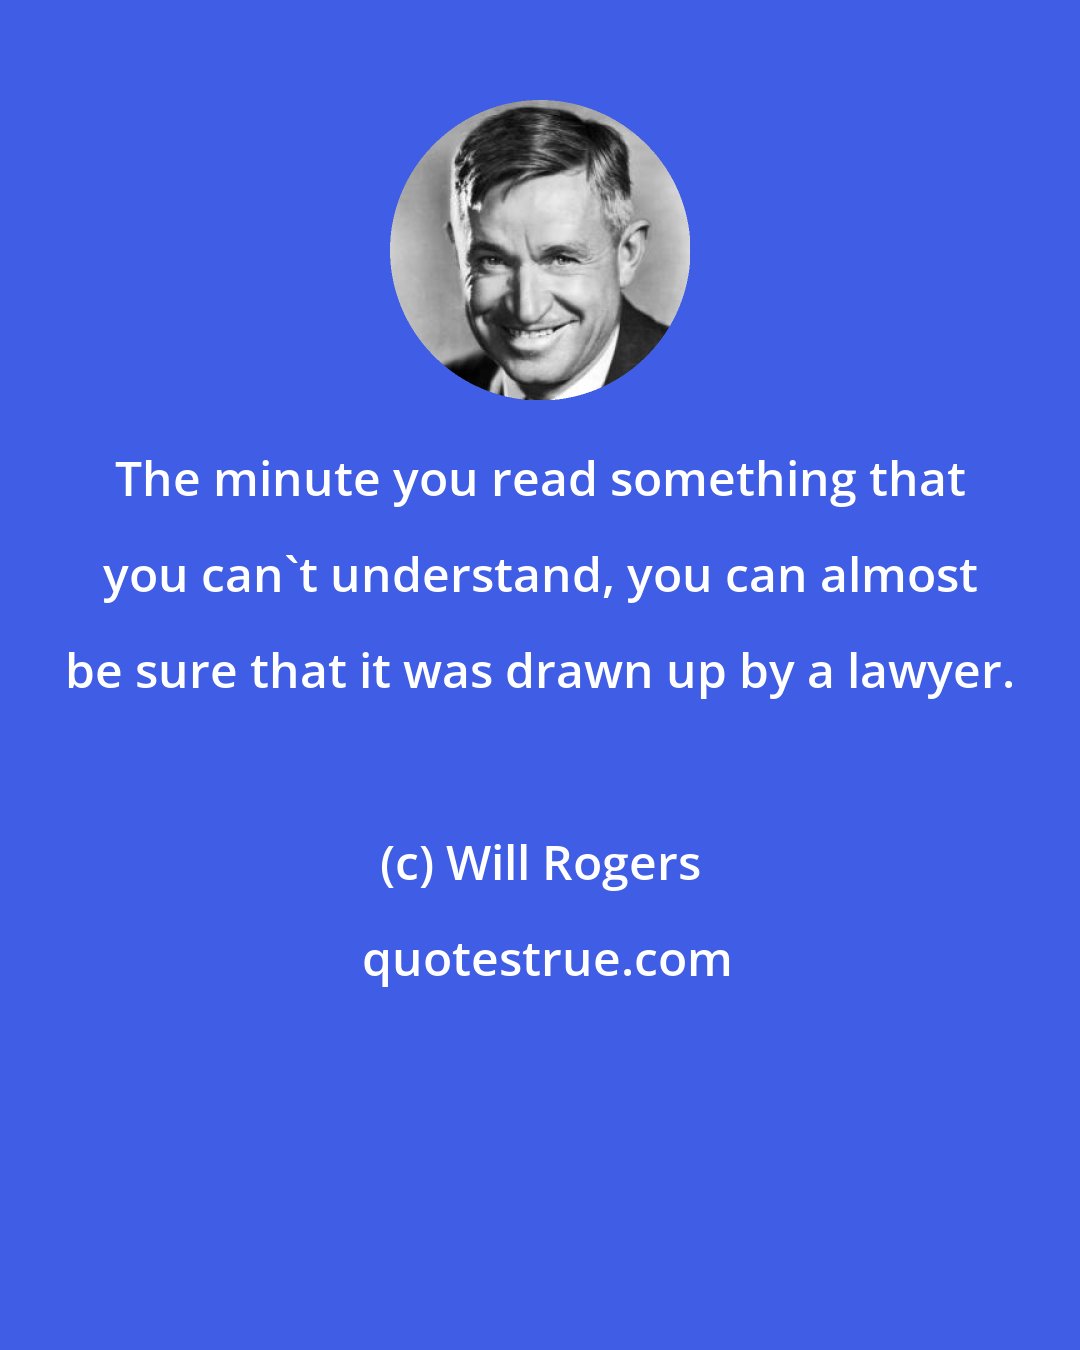 Will Rogers: The minute you read something that you can't understand, you can almost be sure that it was drawn up by a lawyer.